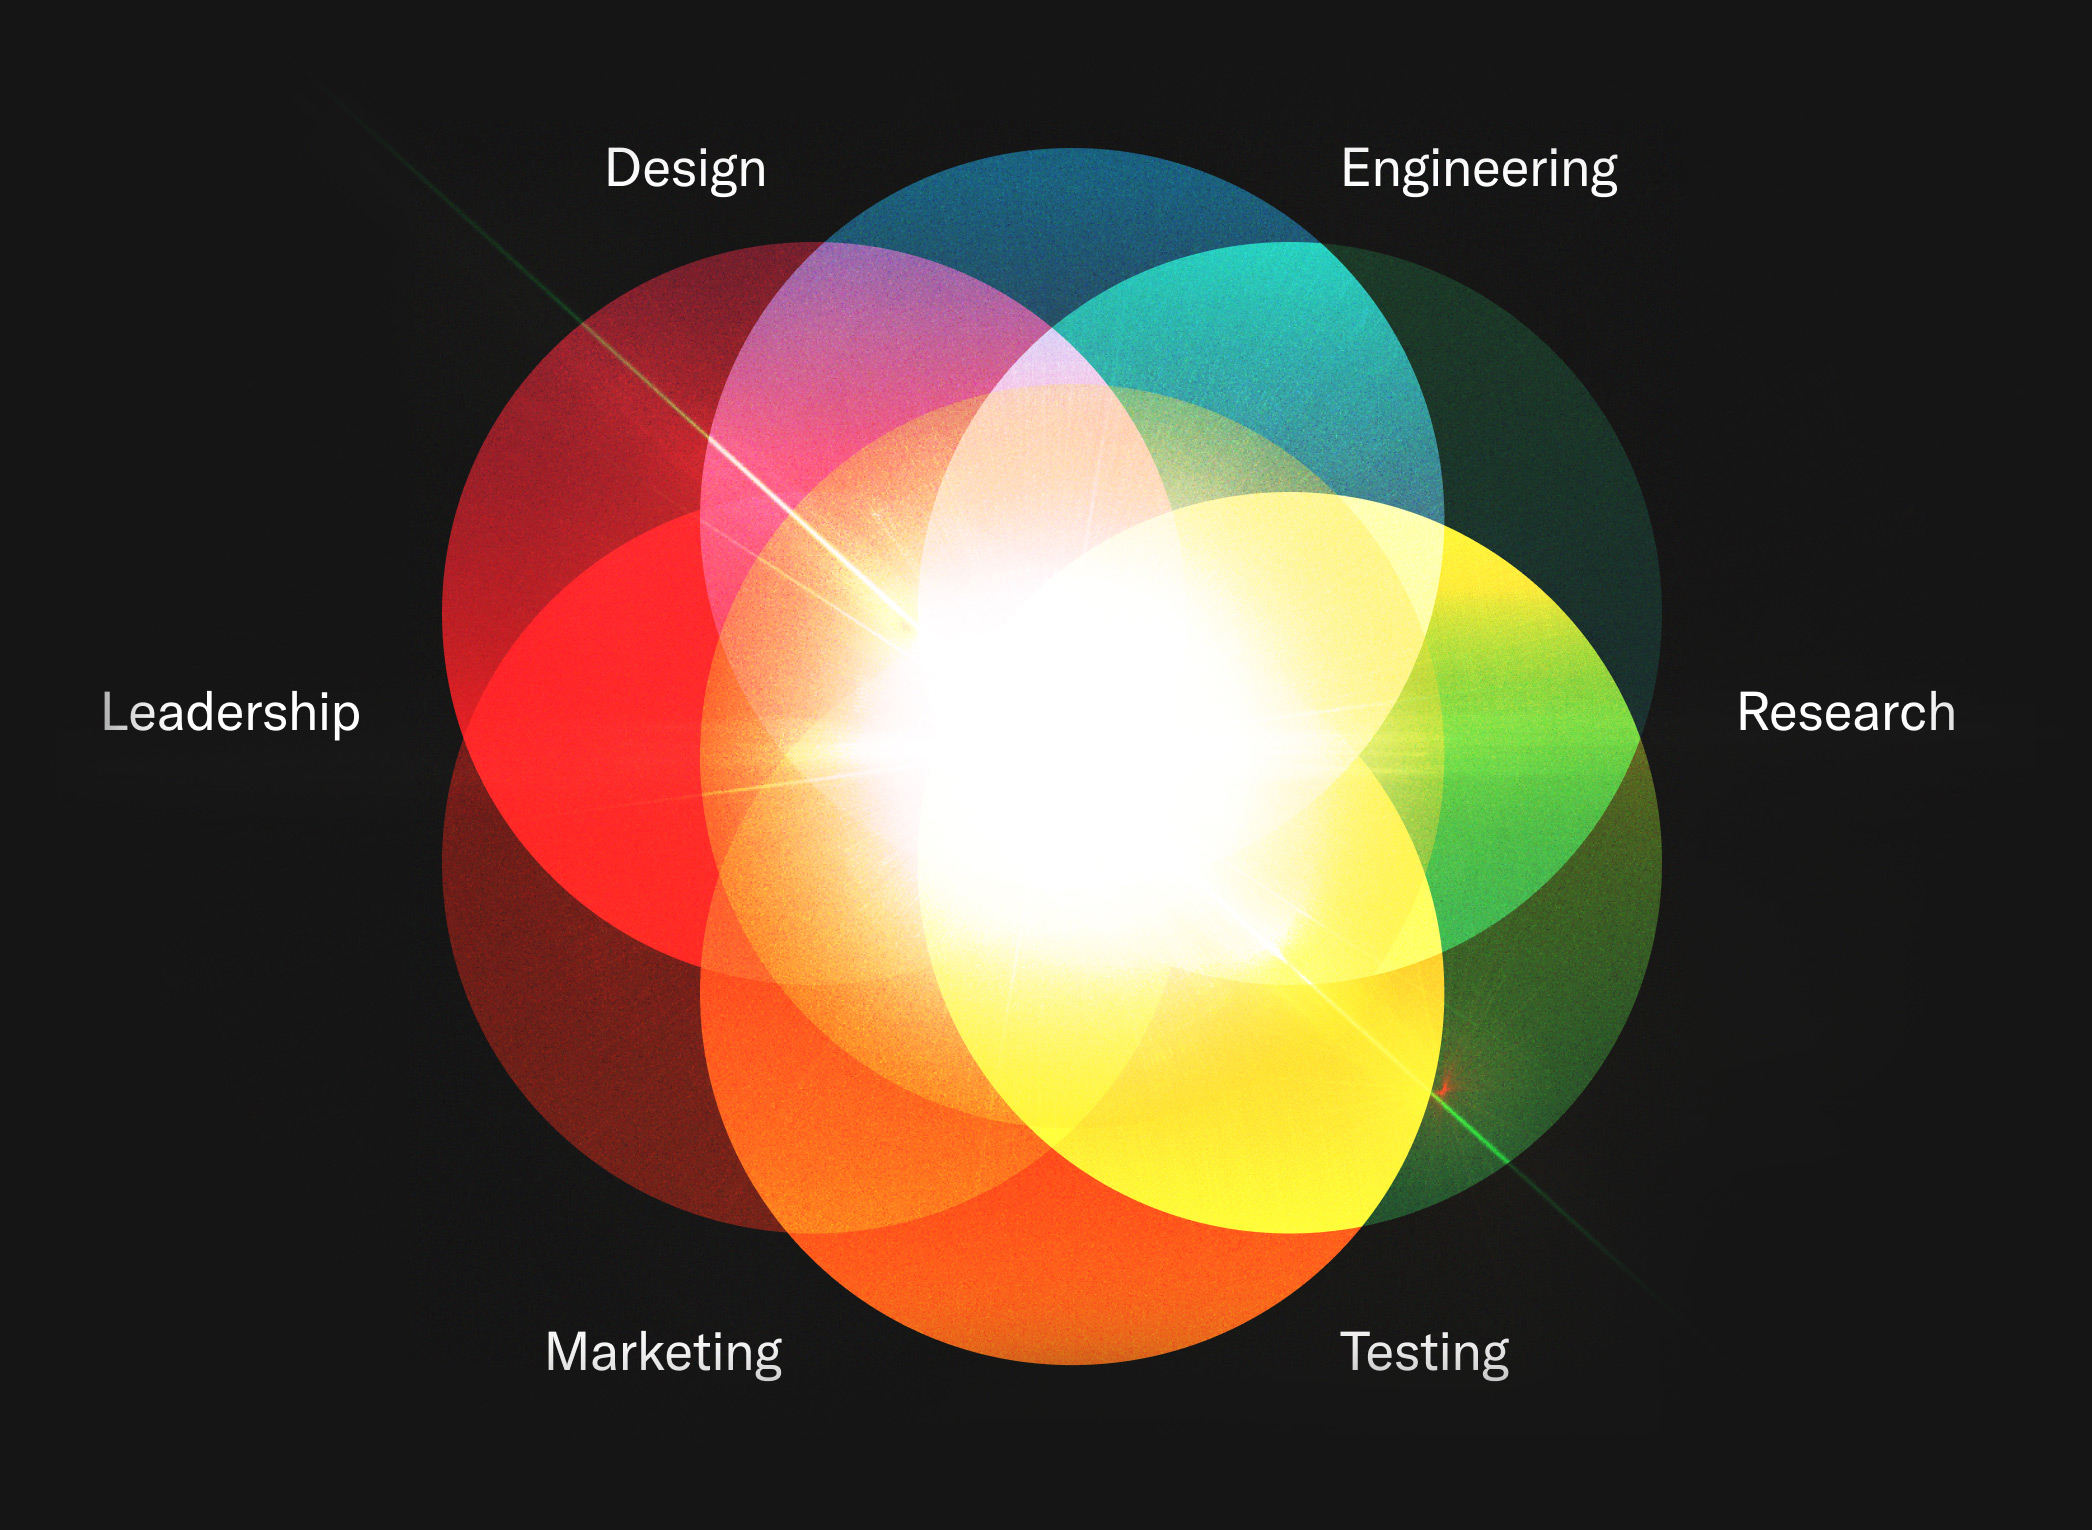 A diagram showing design, engineering, leadership, marketing, research, and testing intersecting